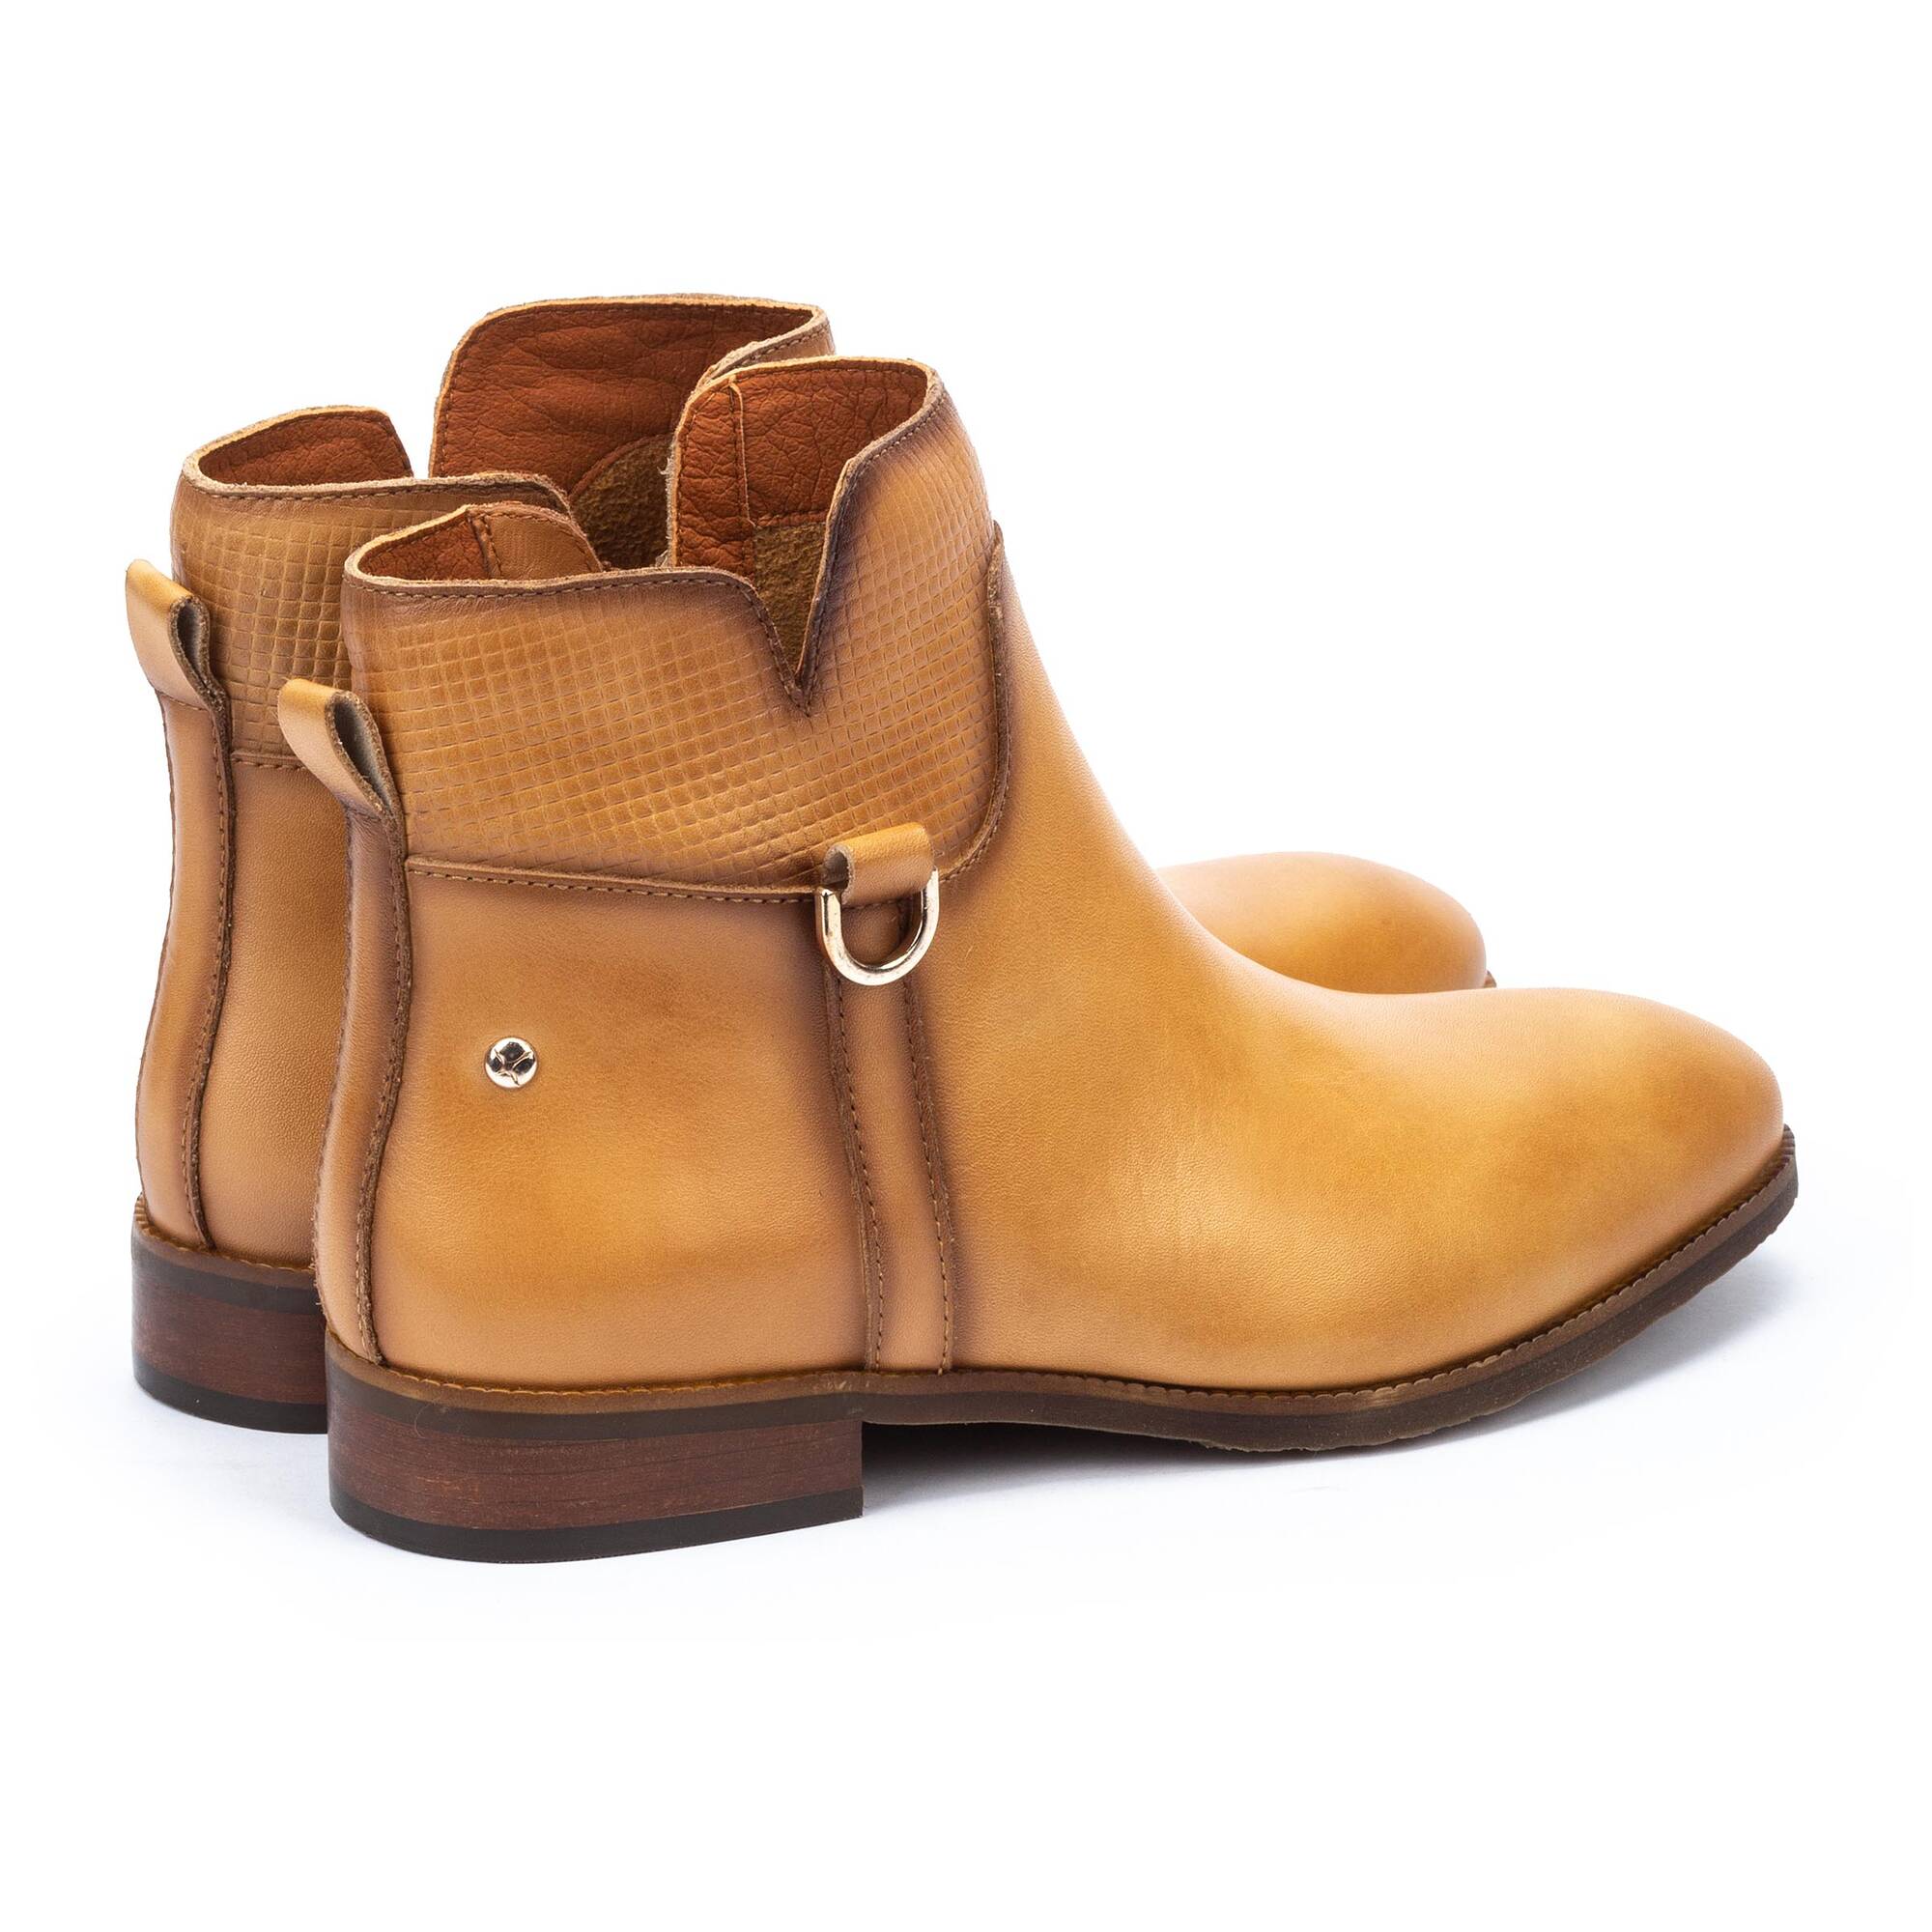 Ankle boots | ROYAL W4D-8530, ALMOND, large image number 30 | null